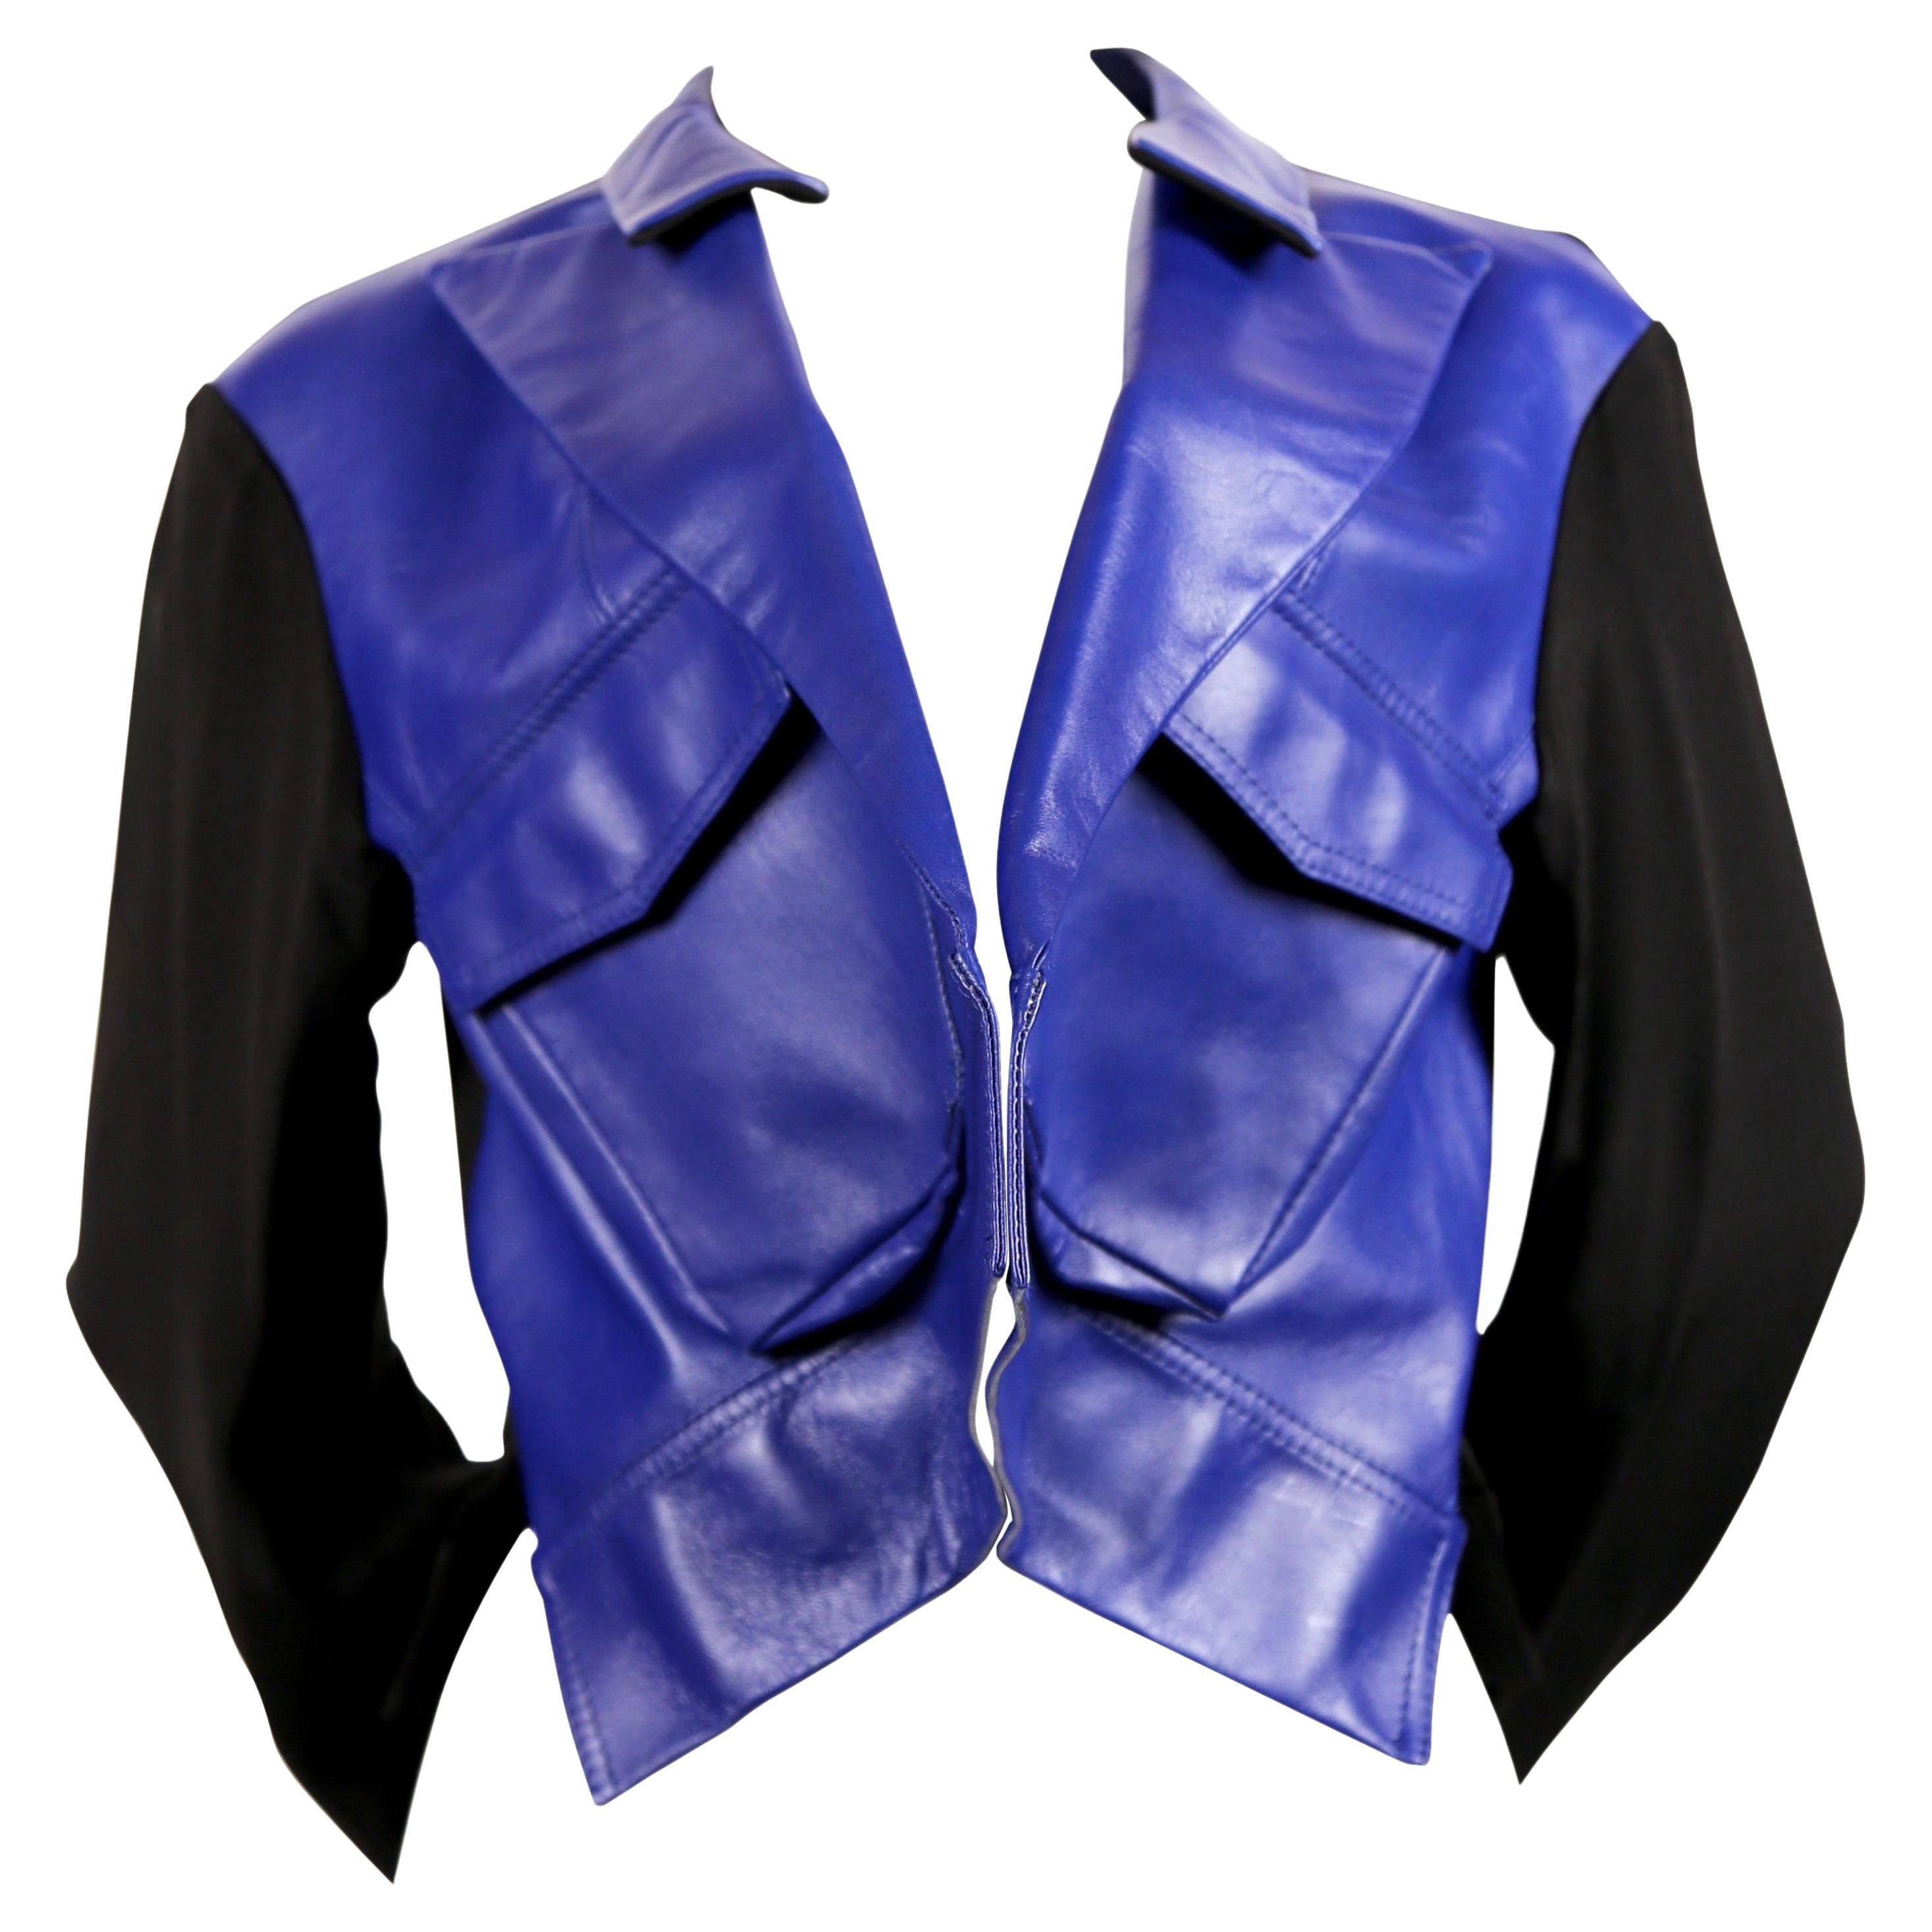 2007 YOHJI YAMAMOTO blue leather runway jacket with forced front - NEW with tags For Sale